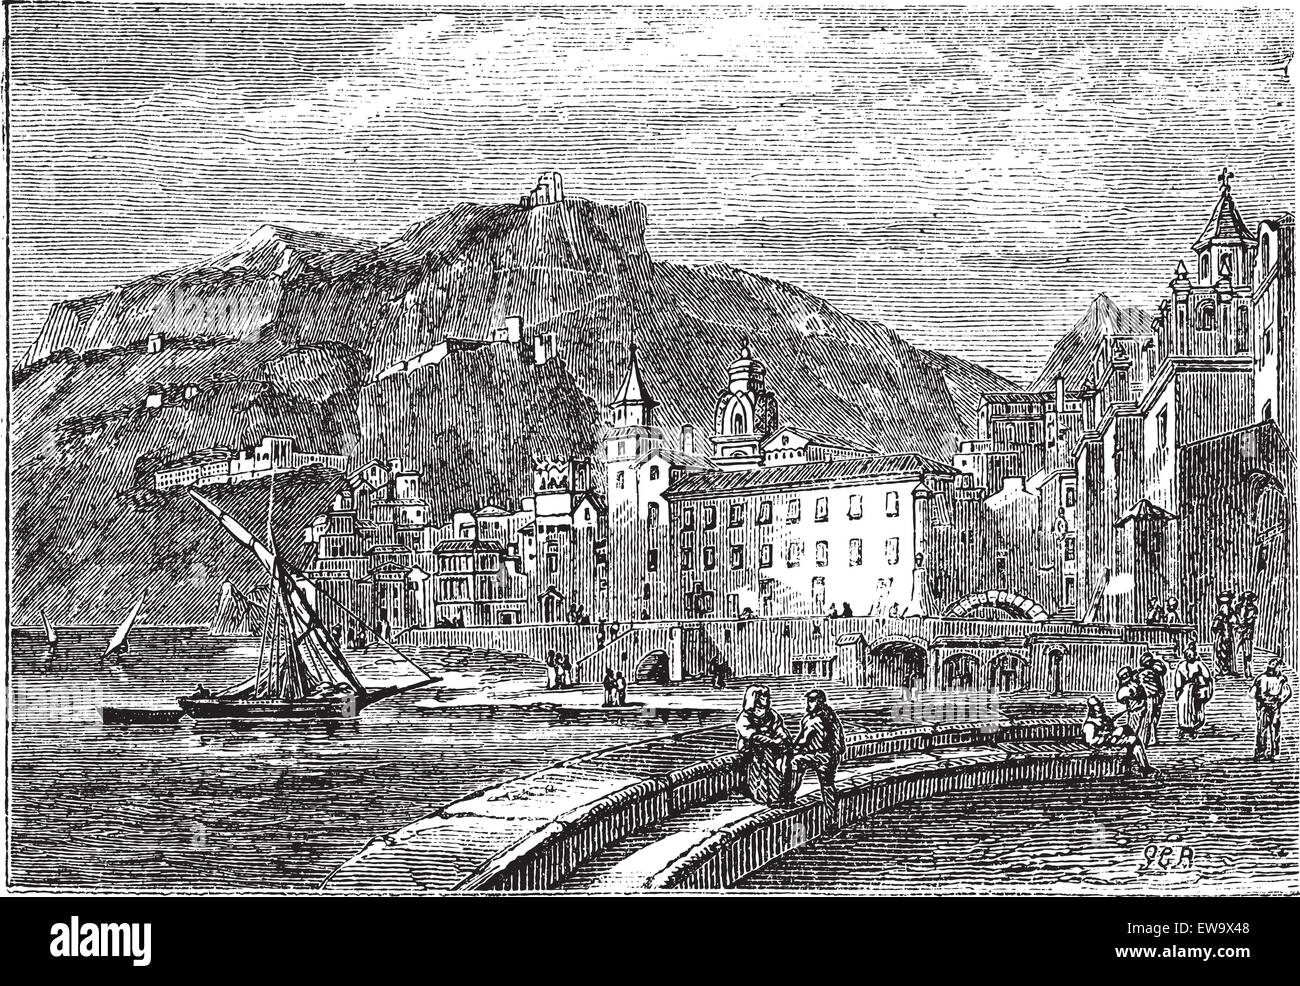 Amalfi in 1890, in the province of Salemo, Italy. Vintage engraving. City scenery of the town of Amalfi. Vector illustration. Stock Vector